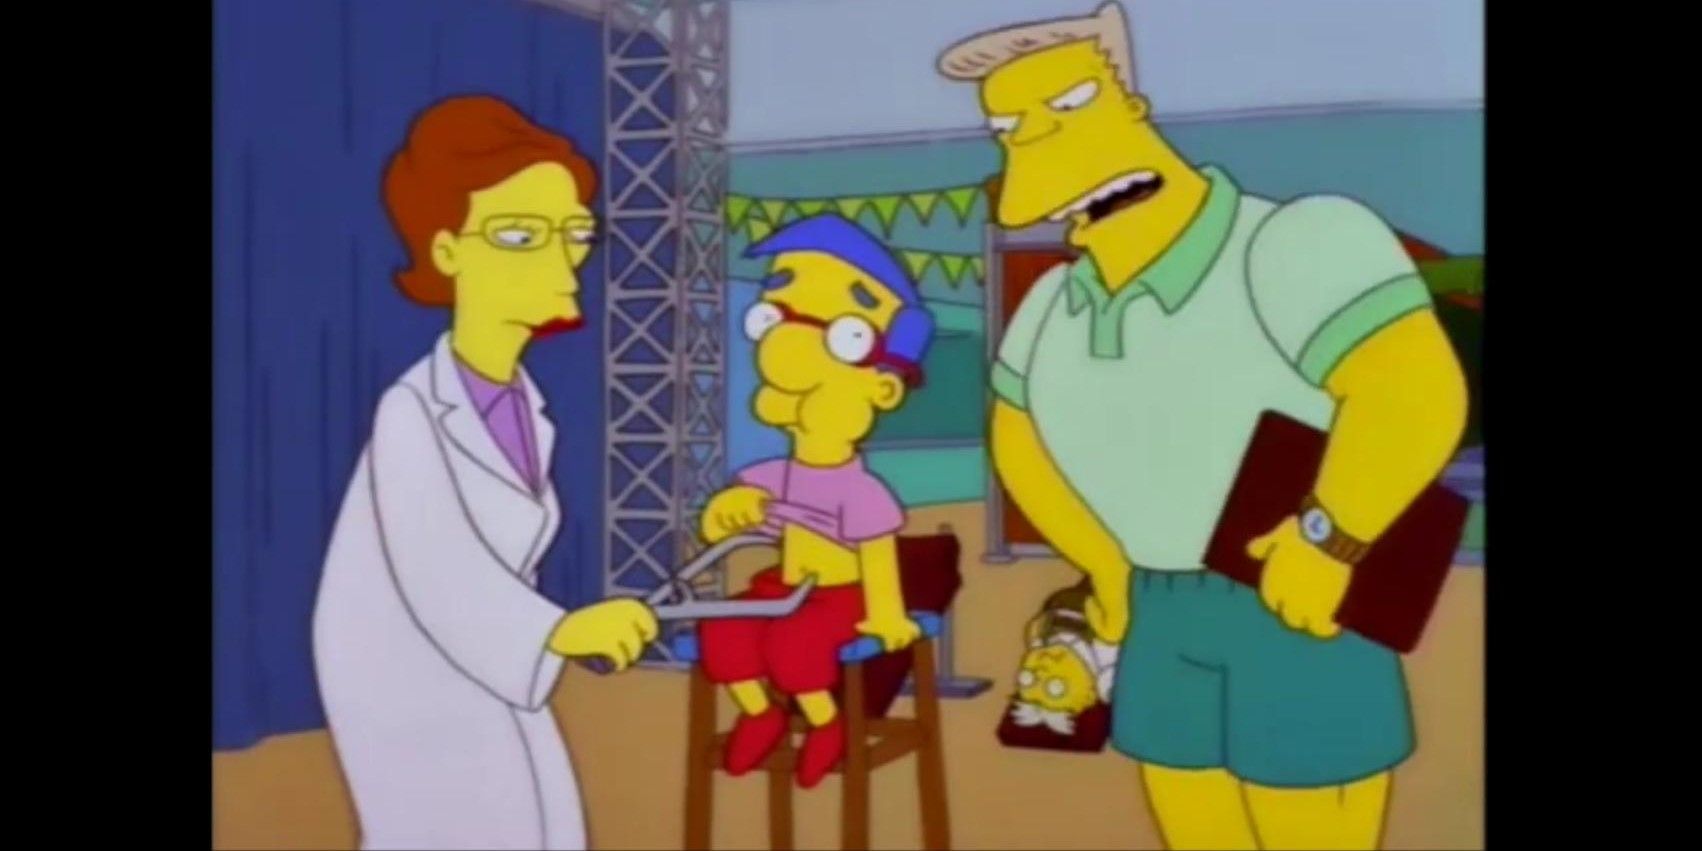 Milhouse Van Houten being yelled at by a coach and doctor in The Simpsons